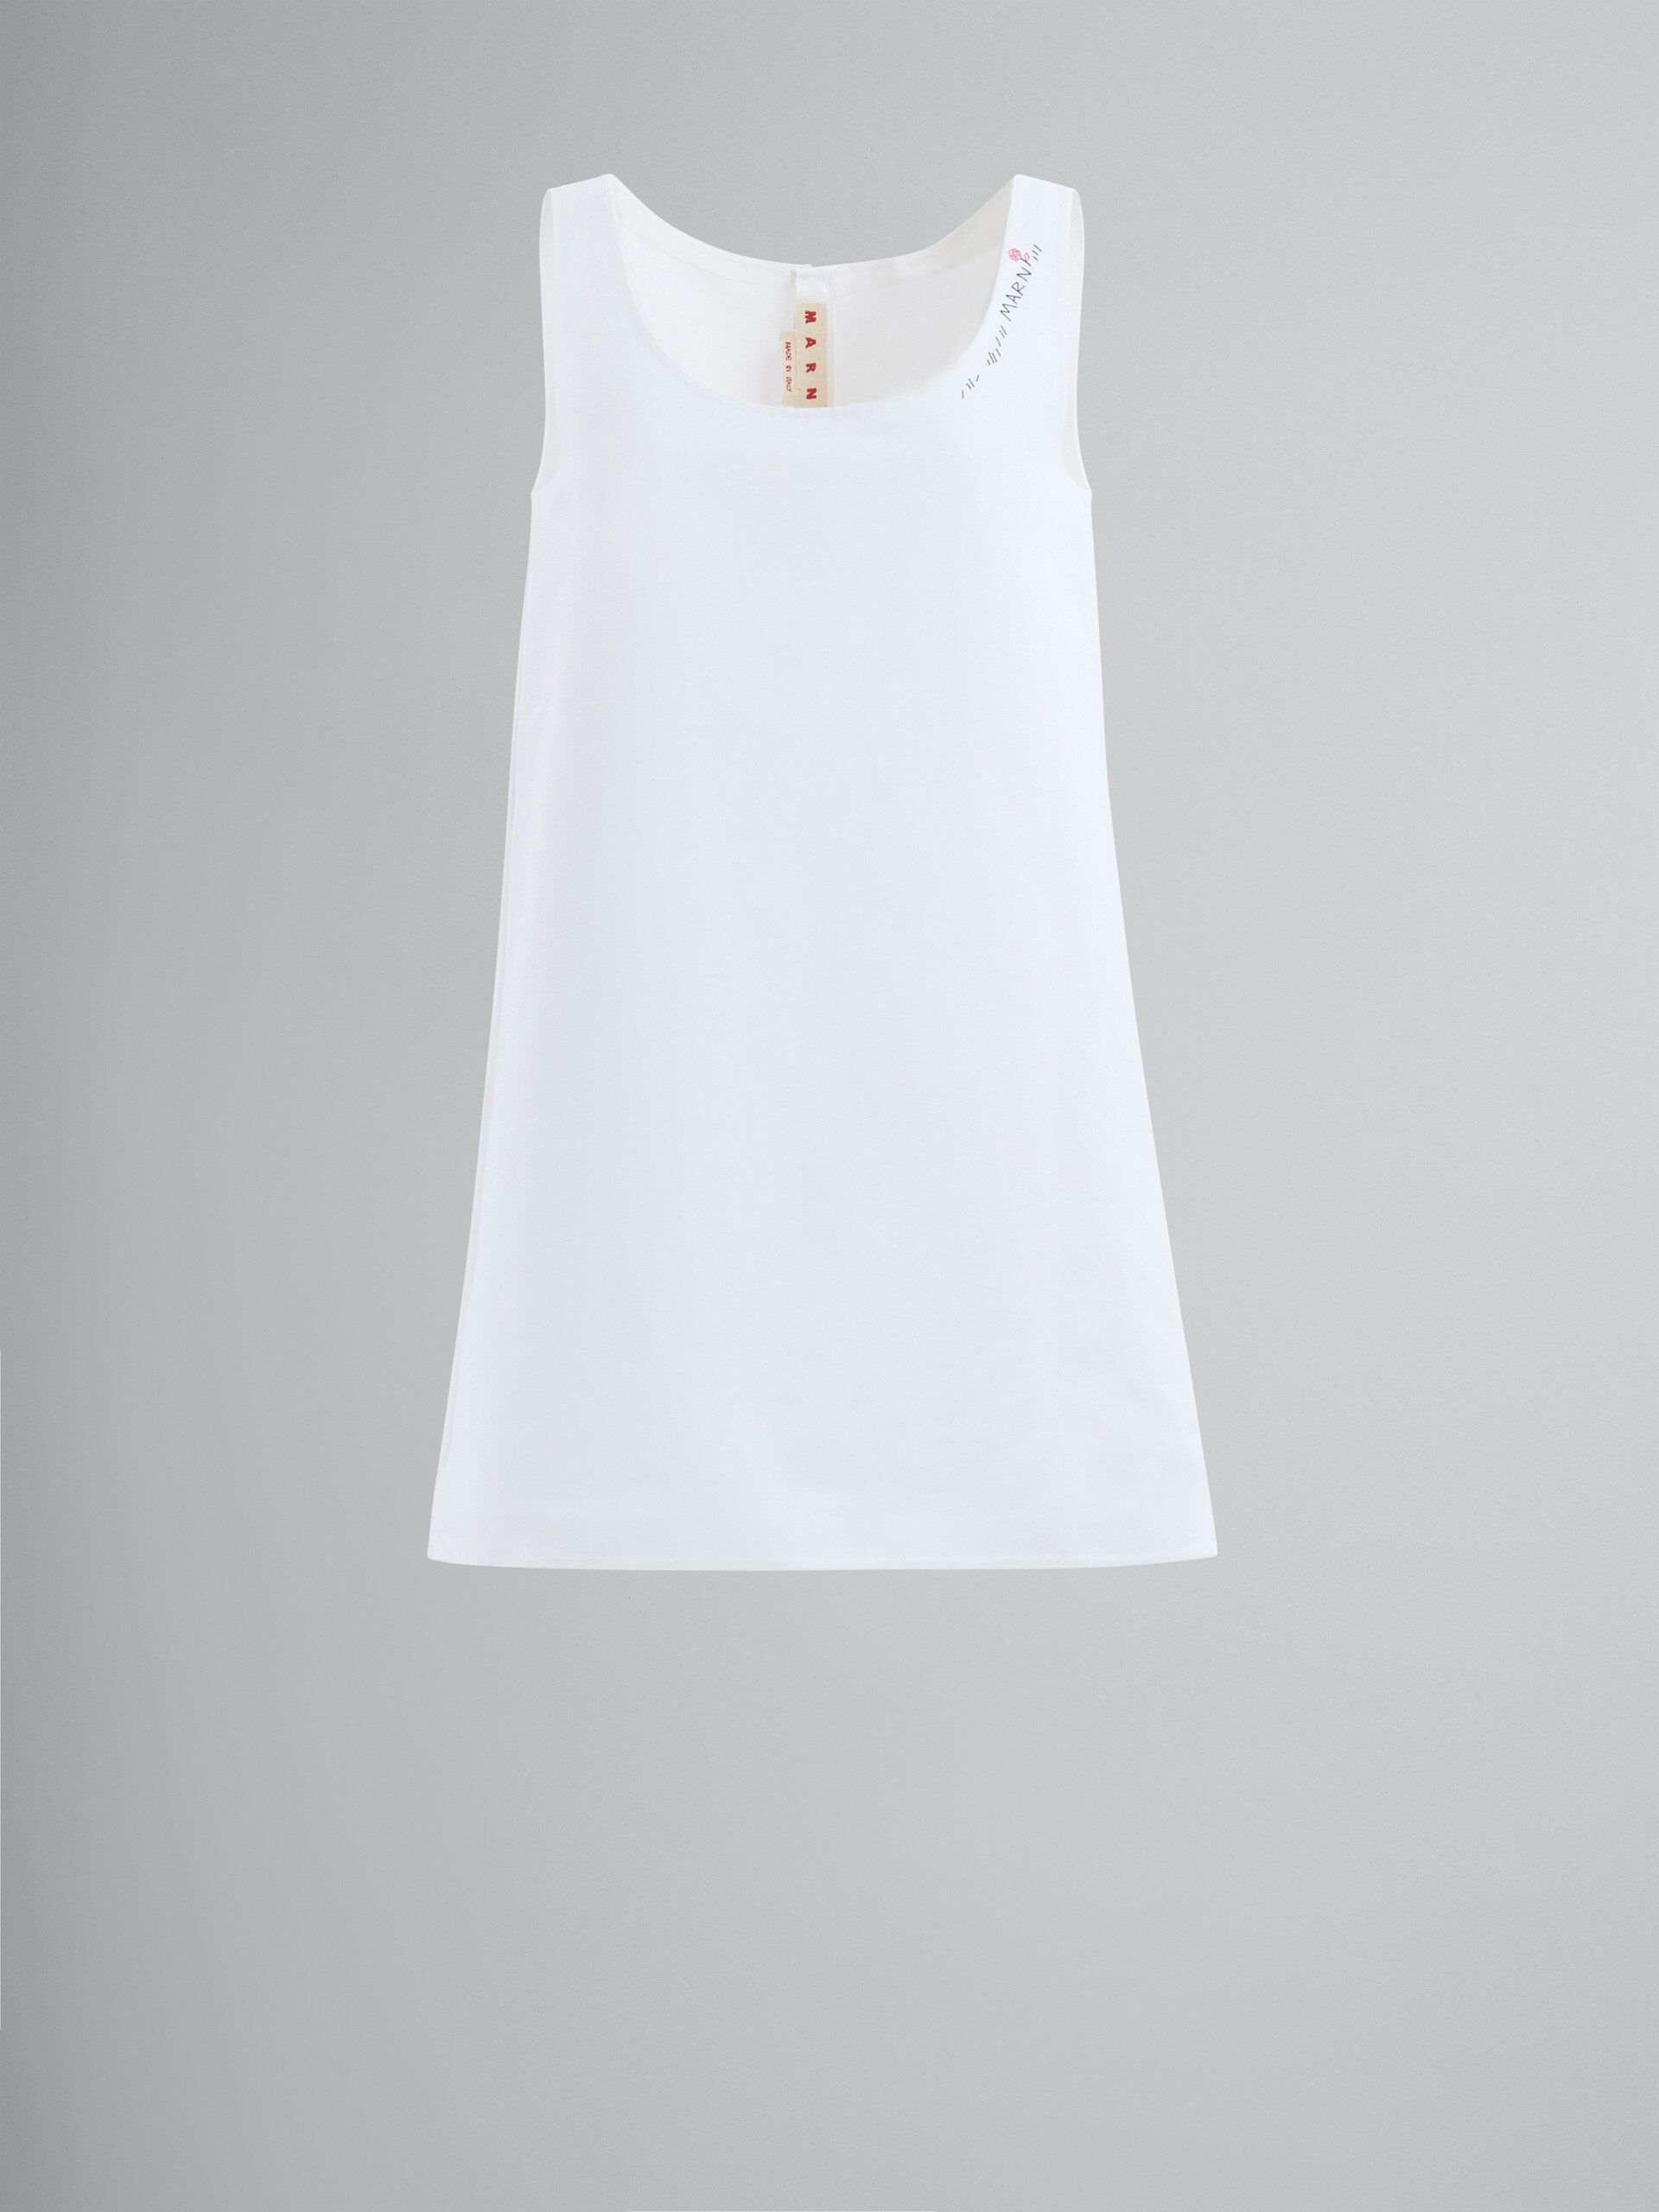 White cady A-line dress with Marni mending - Dresses - Image 1